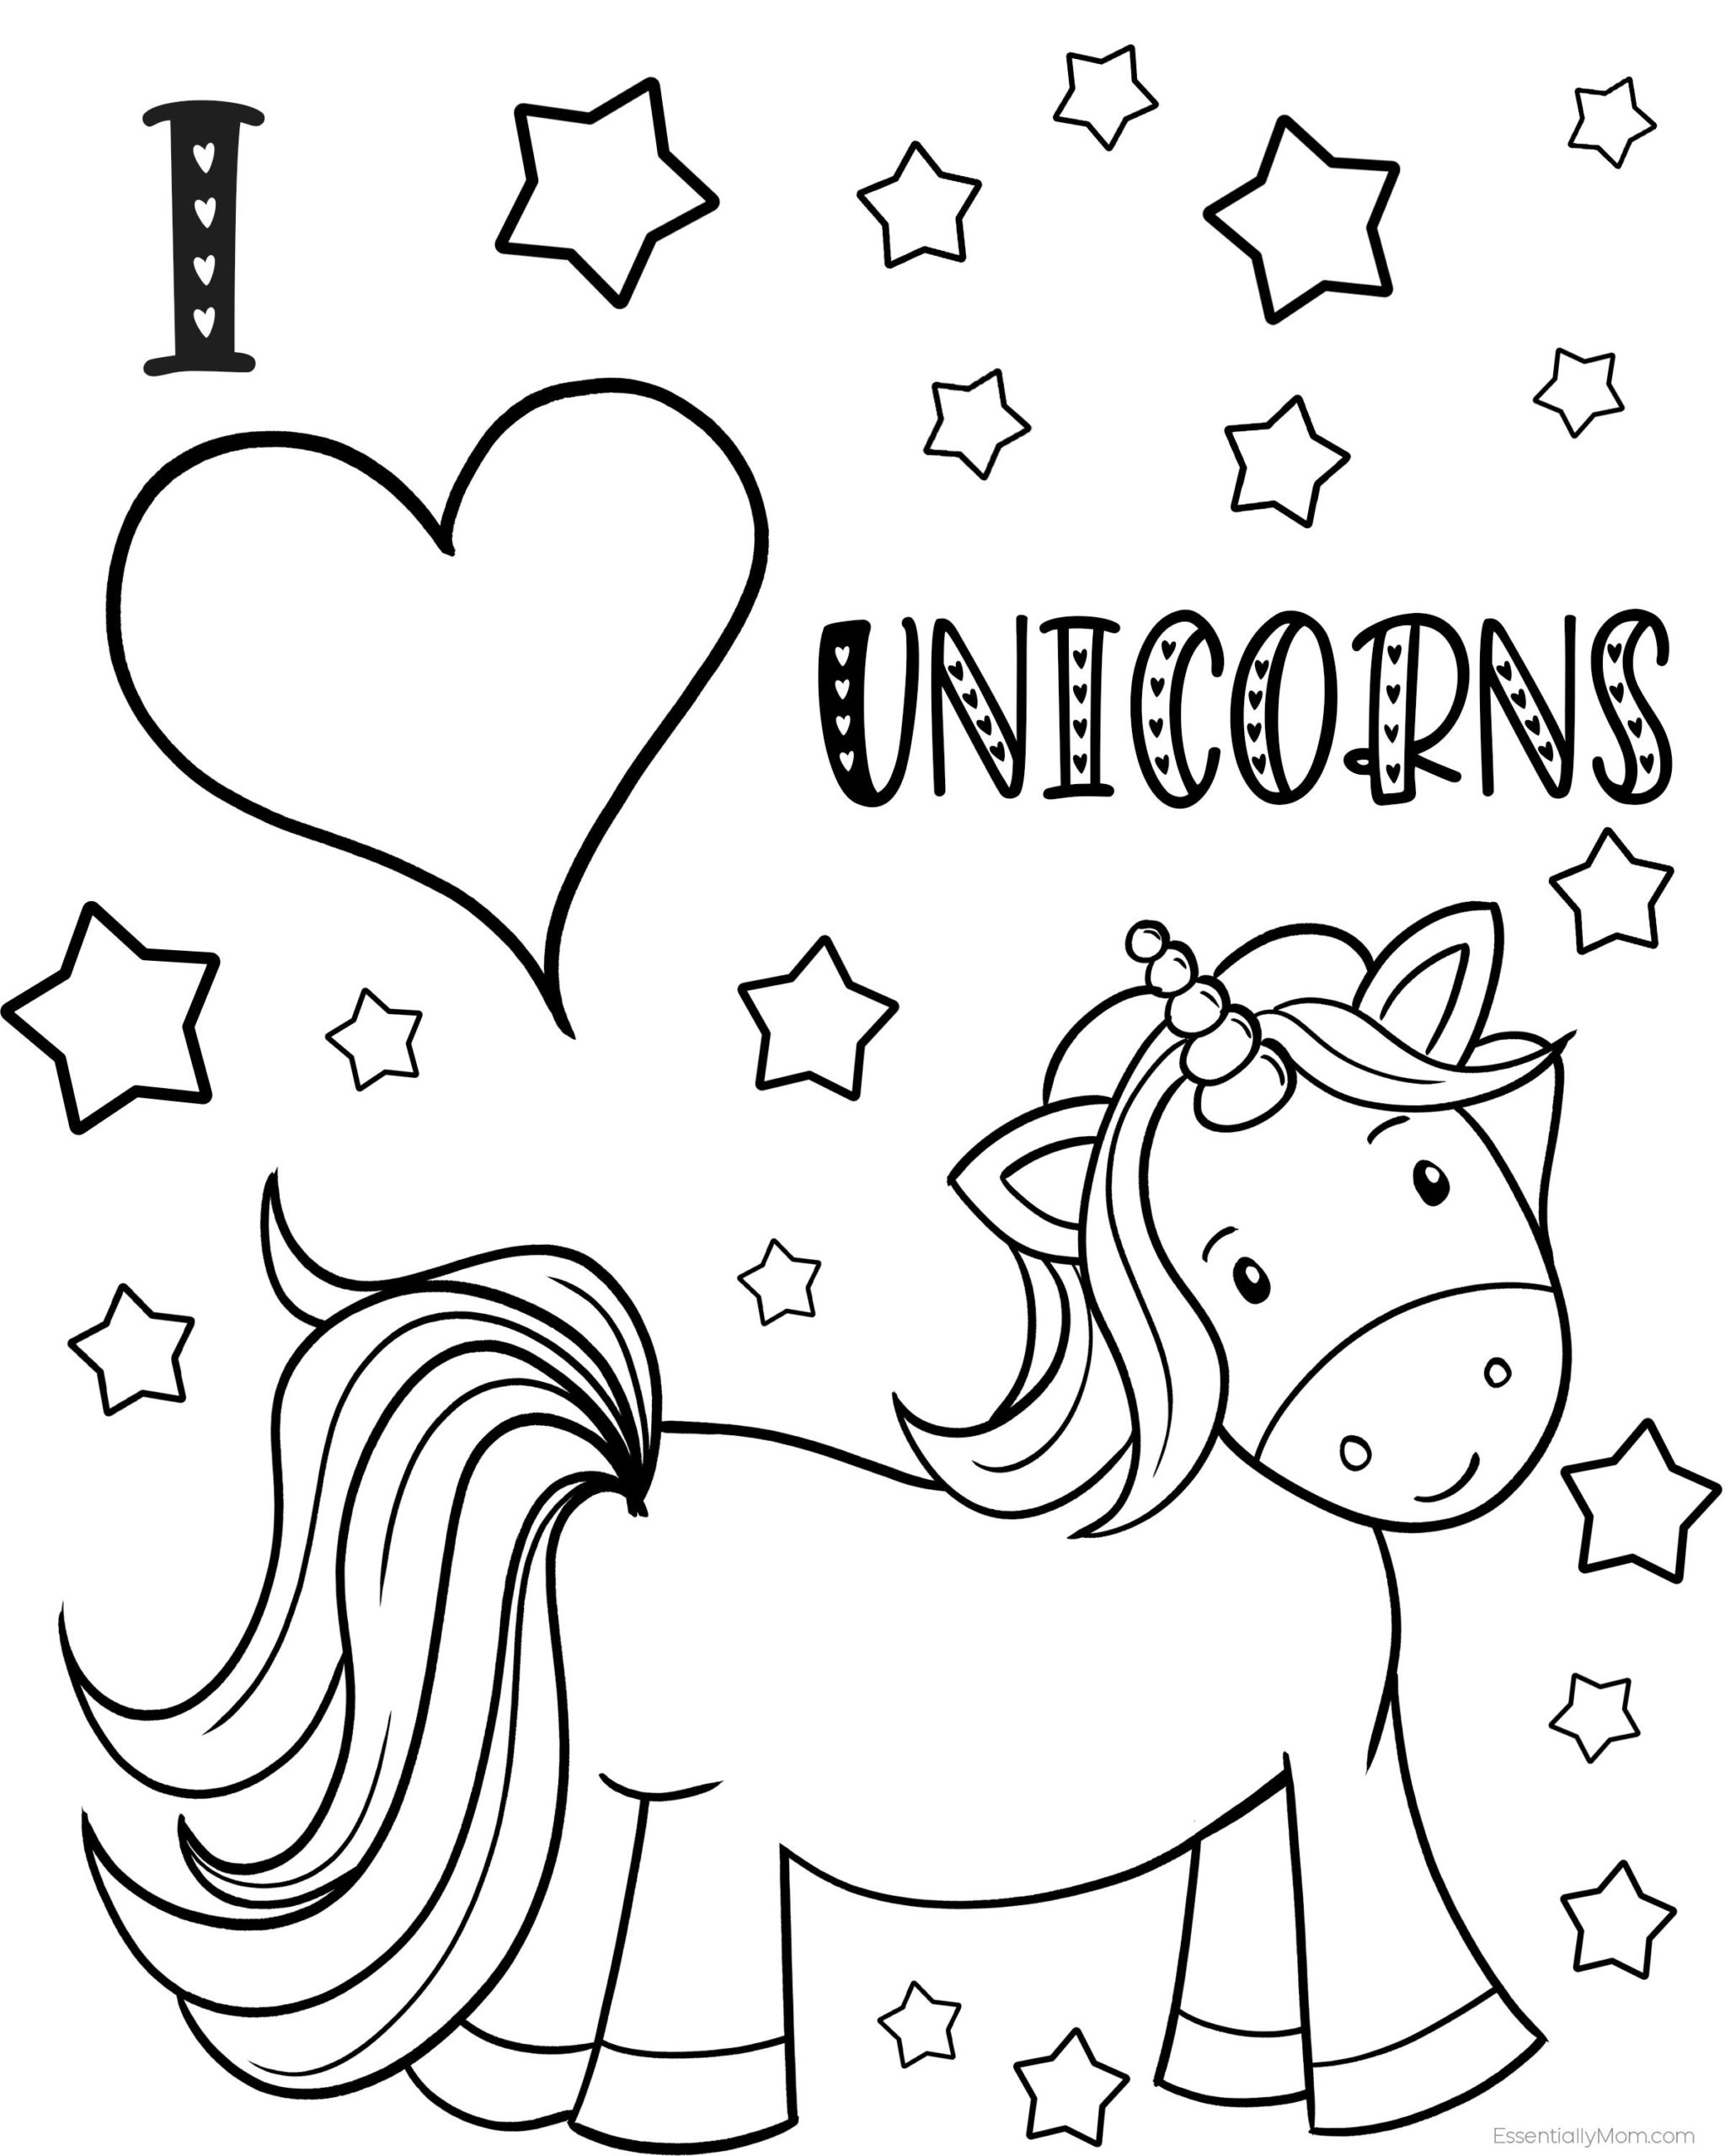 free-unicorn-coloring-pages-printable-for-kids-unicorn-coloring-book